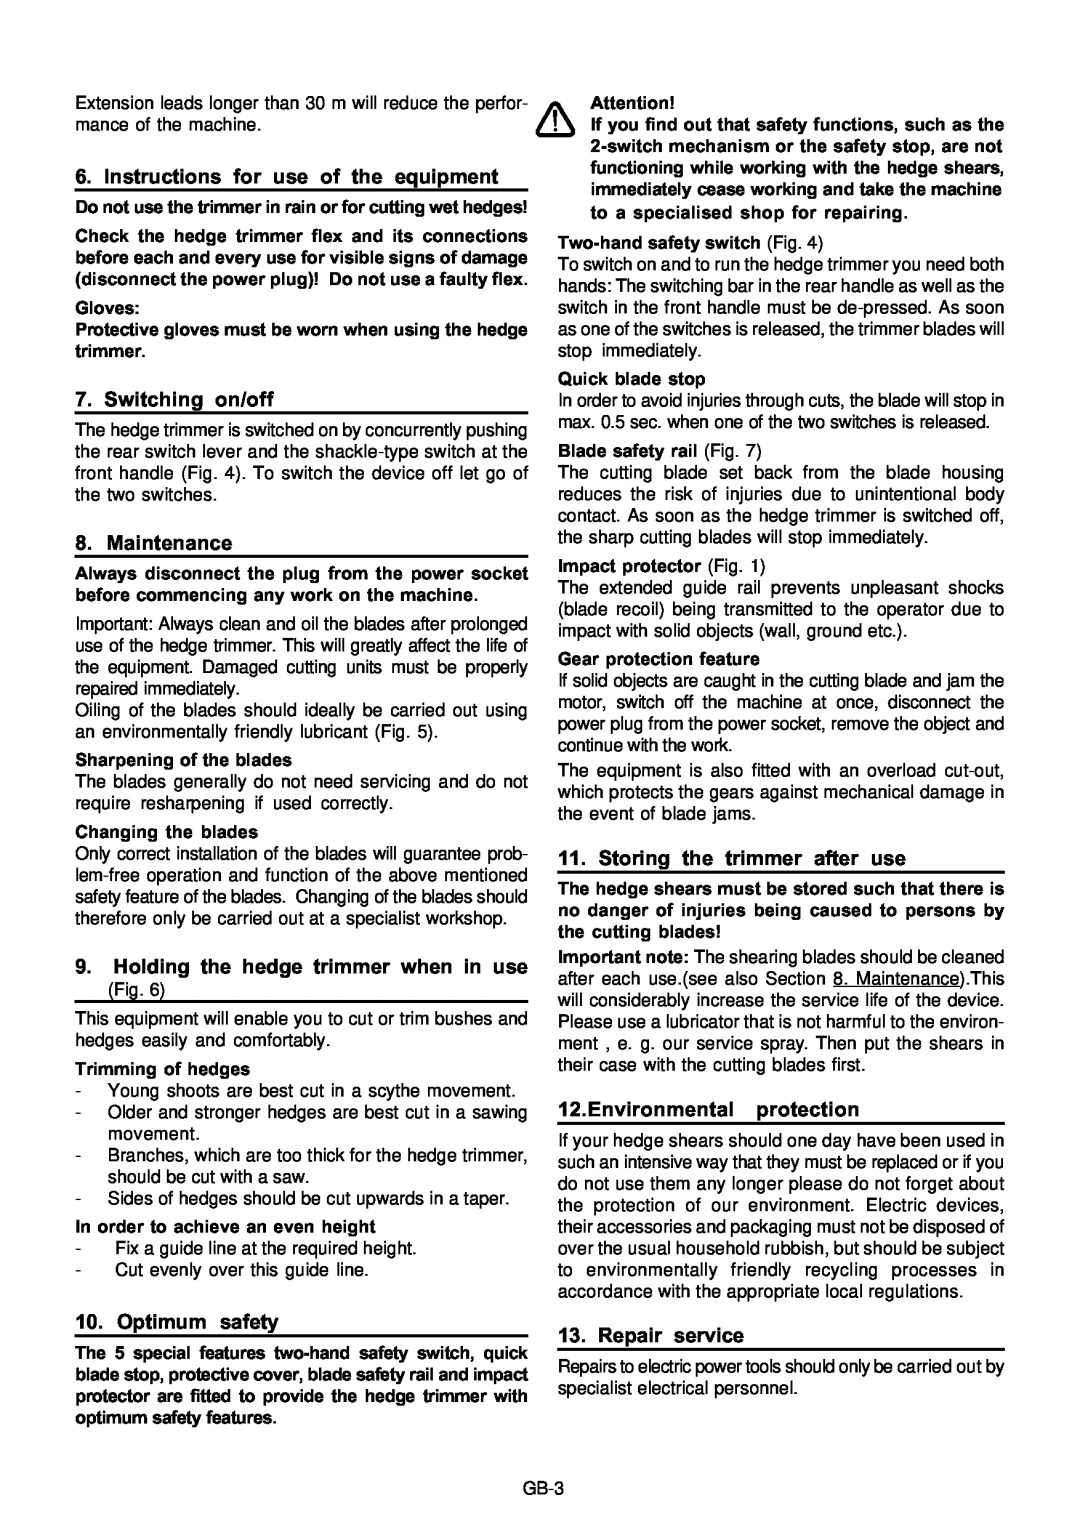 Stiga SH 54 Instructions for use of the equipment, Switching on/off, Maintenance, Holding the hedge trimmer when in use 